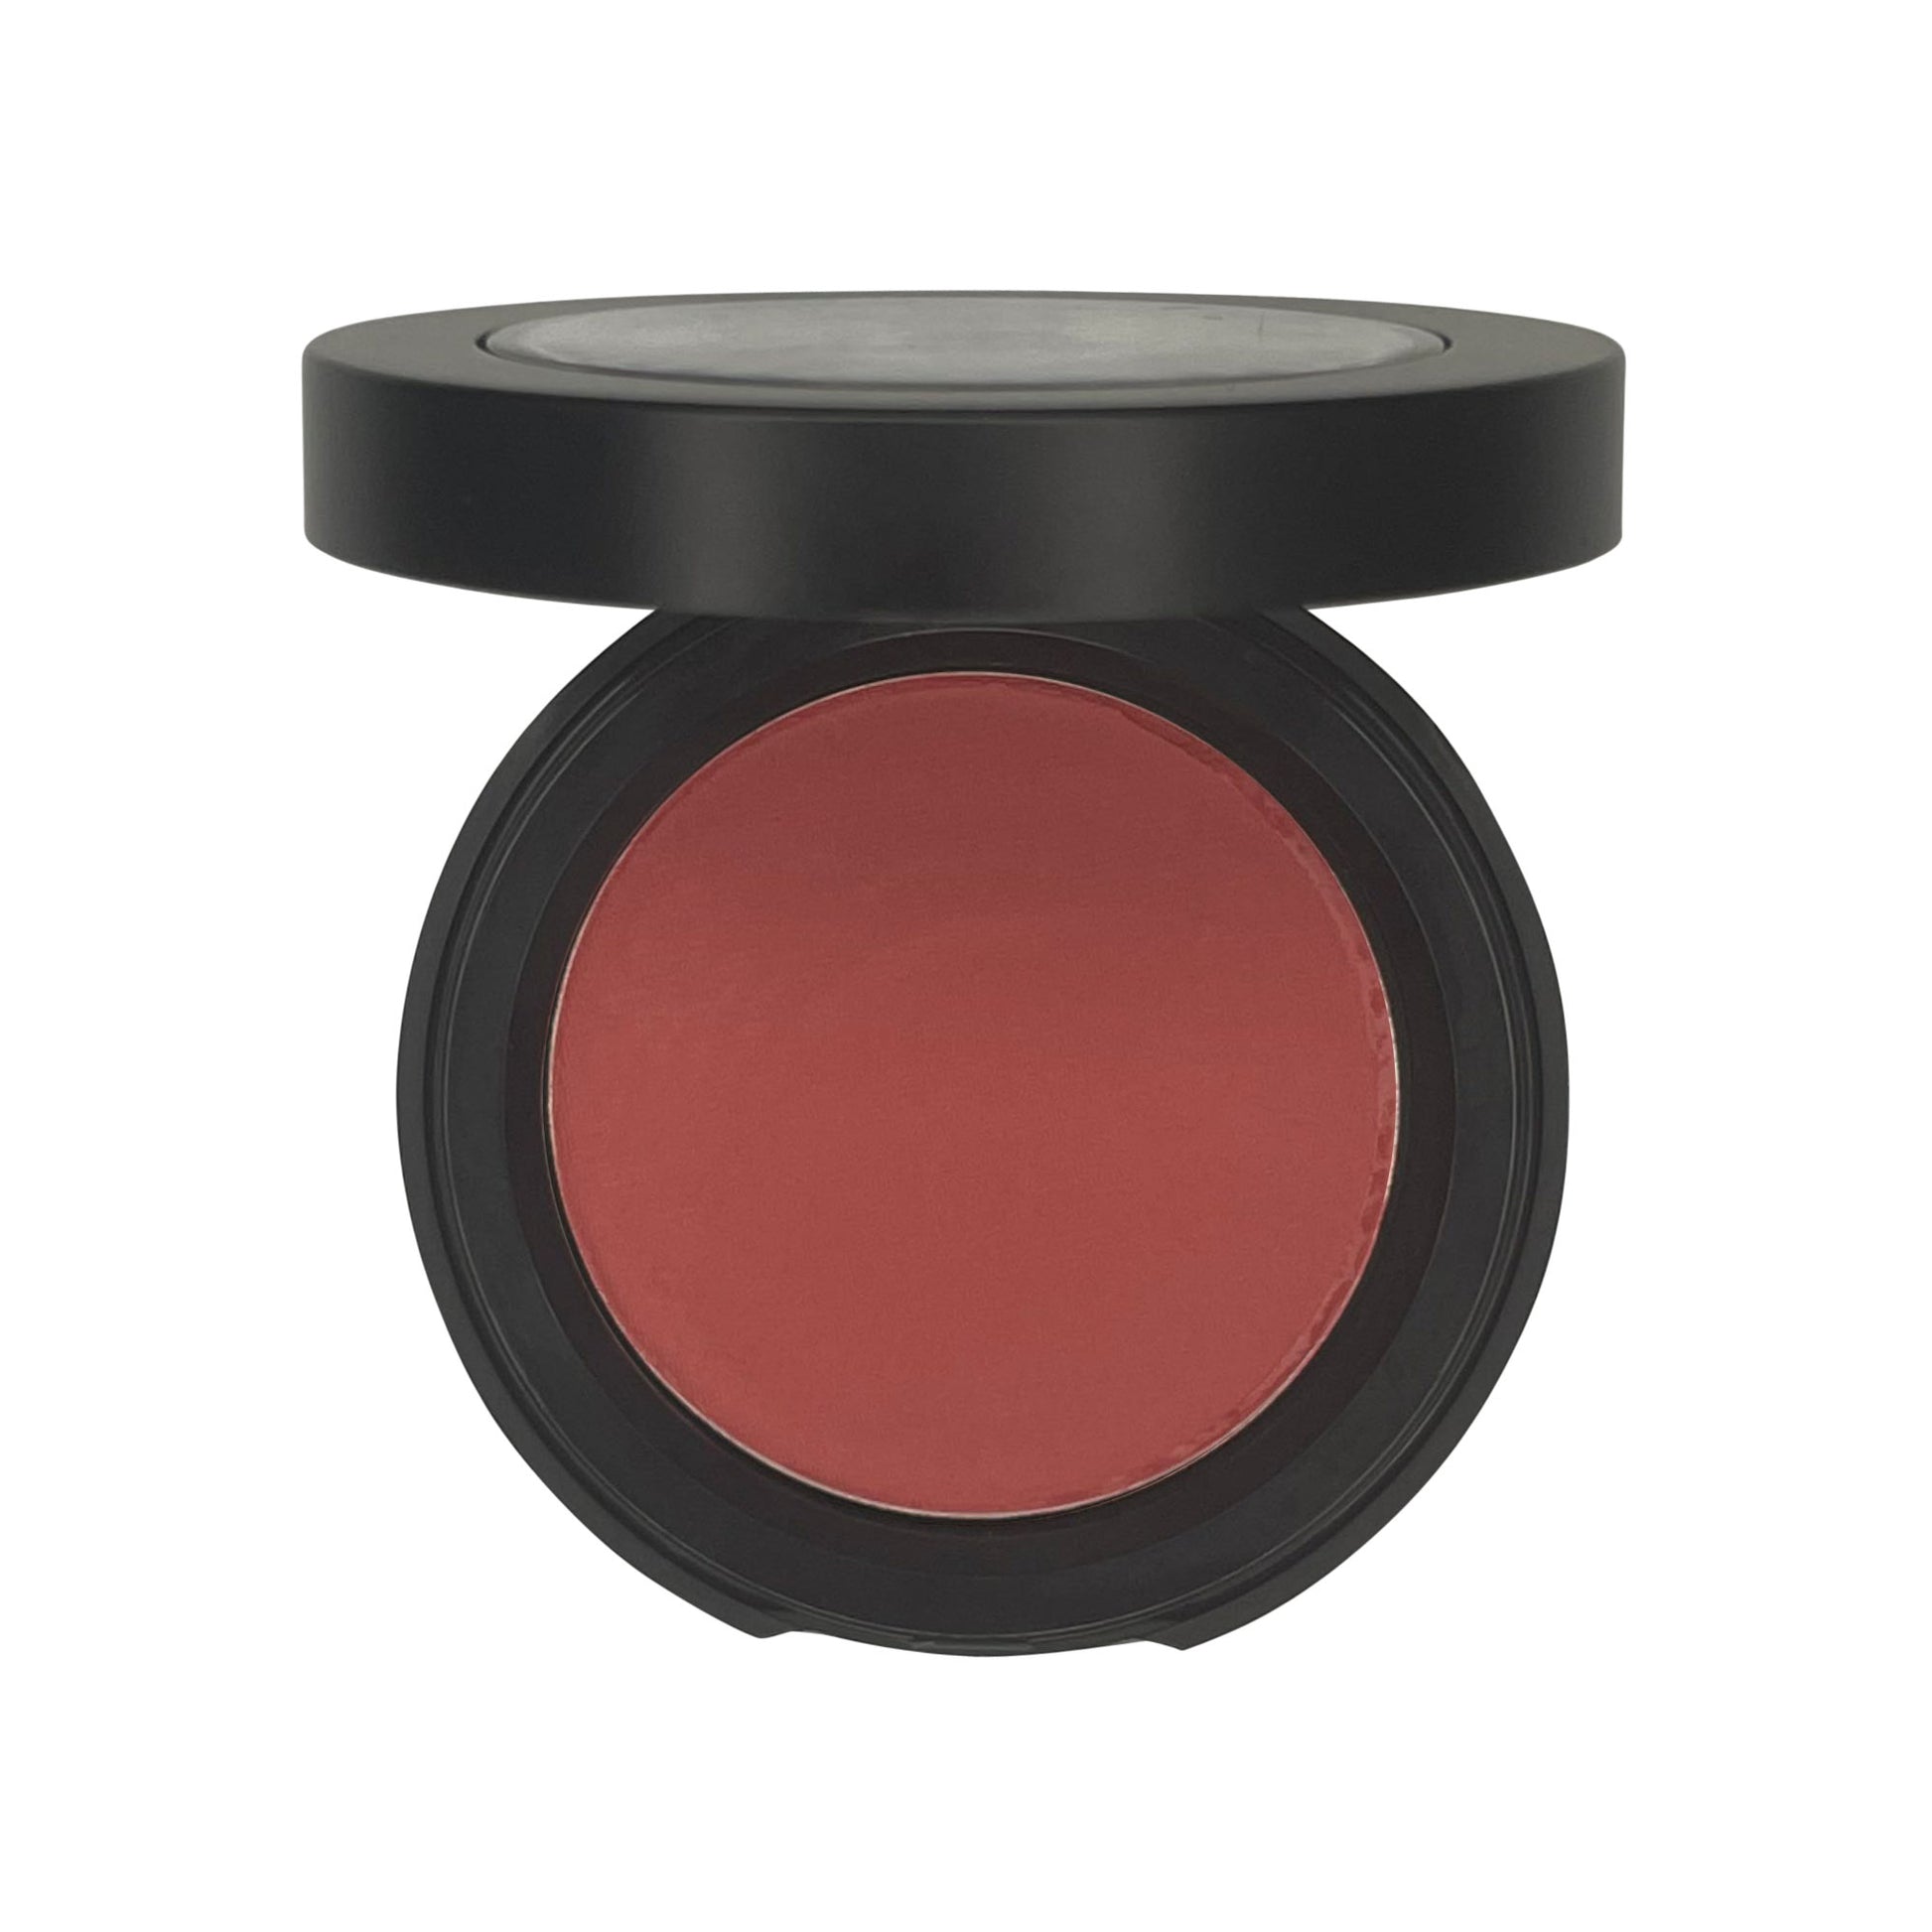 For a flawless, radiant complexion, try using this talc-free blush from Cruisin Organics. Its velvety-soft pressed powder effortlessly melts into your skin, offering a customizable flush with their single-pan blush that's perfect for touch-ups on the go. Plus, with its triple-milled formulation, it guarantees high-quality results for any occasion.